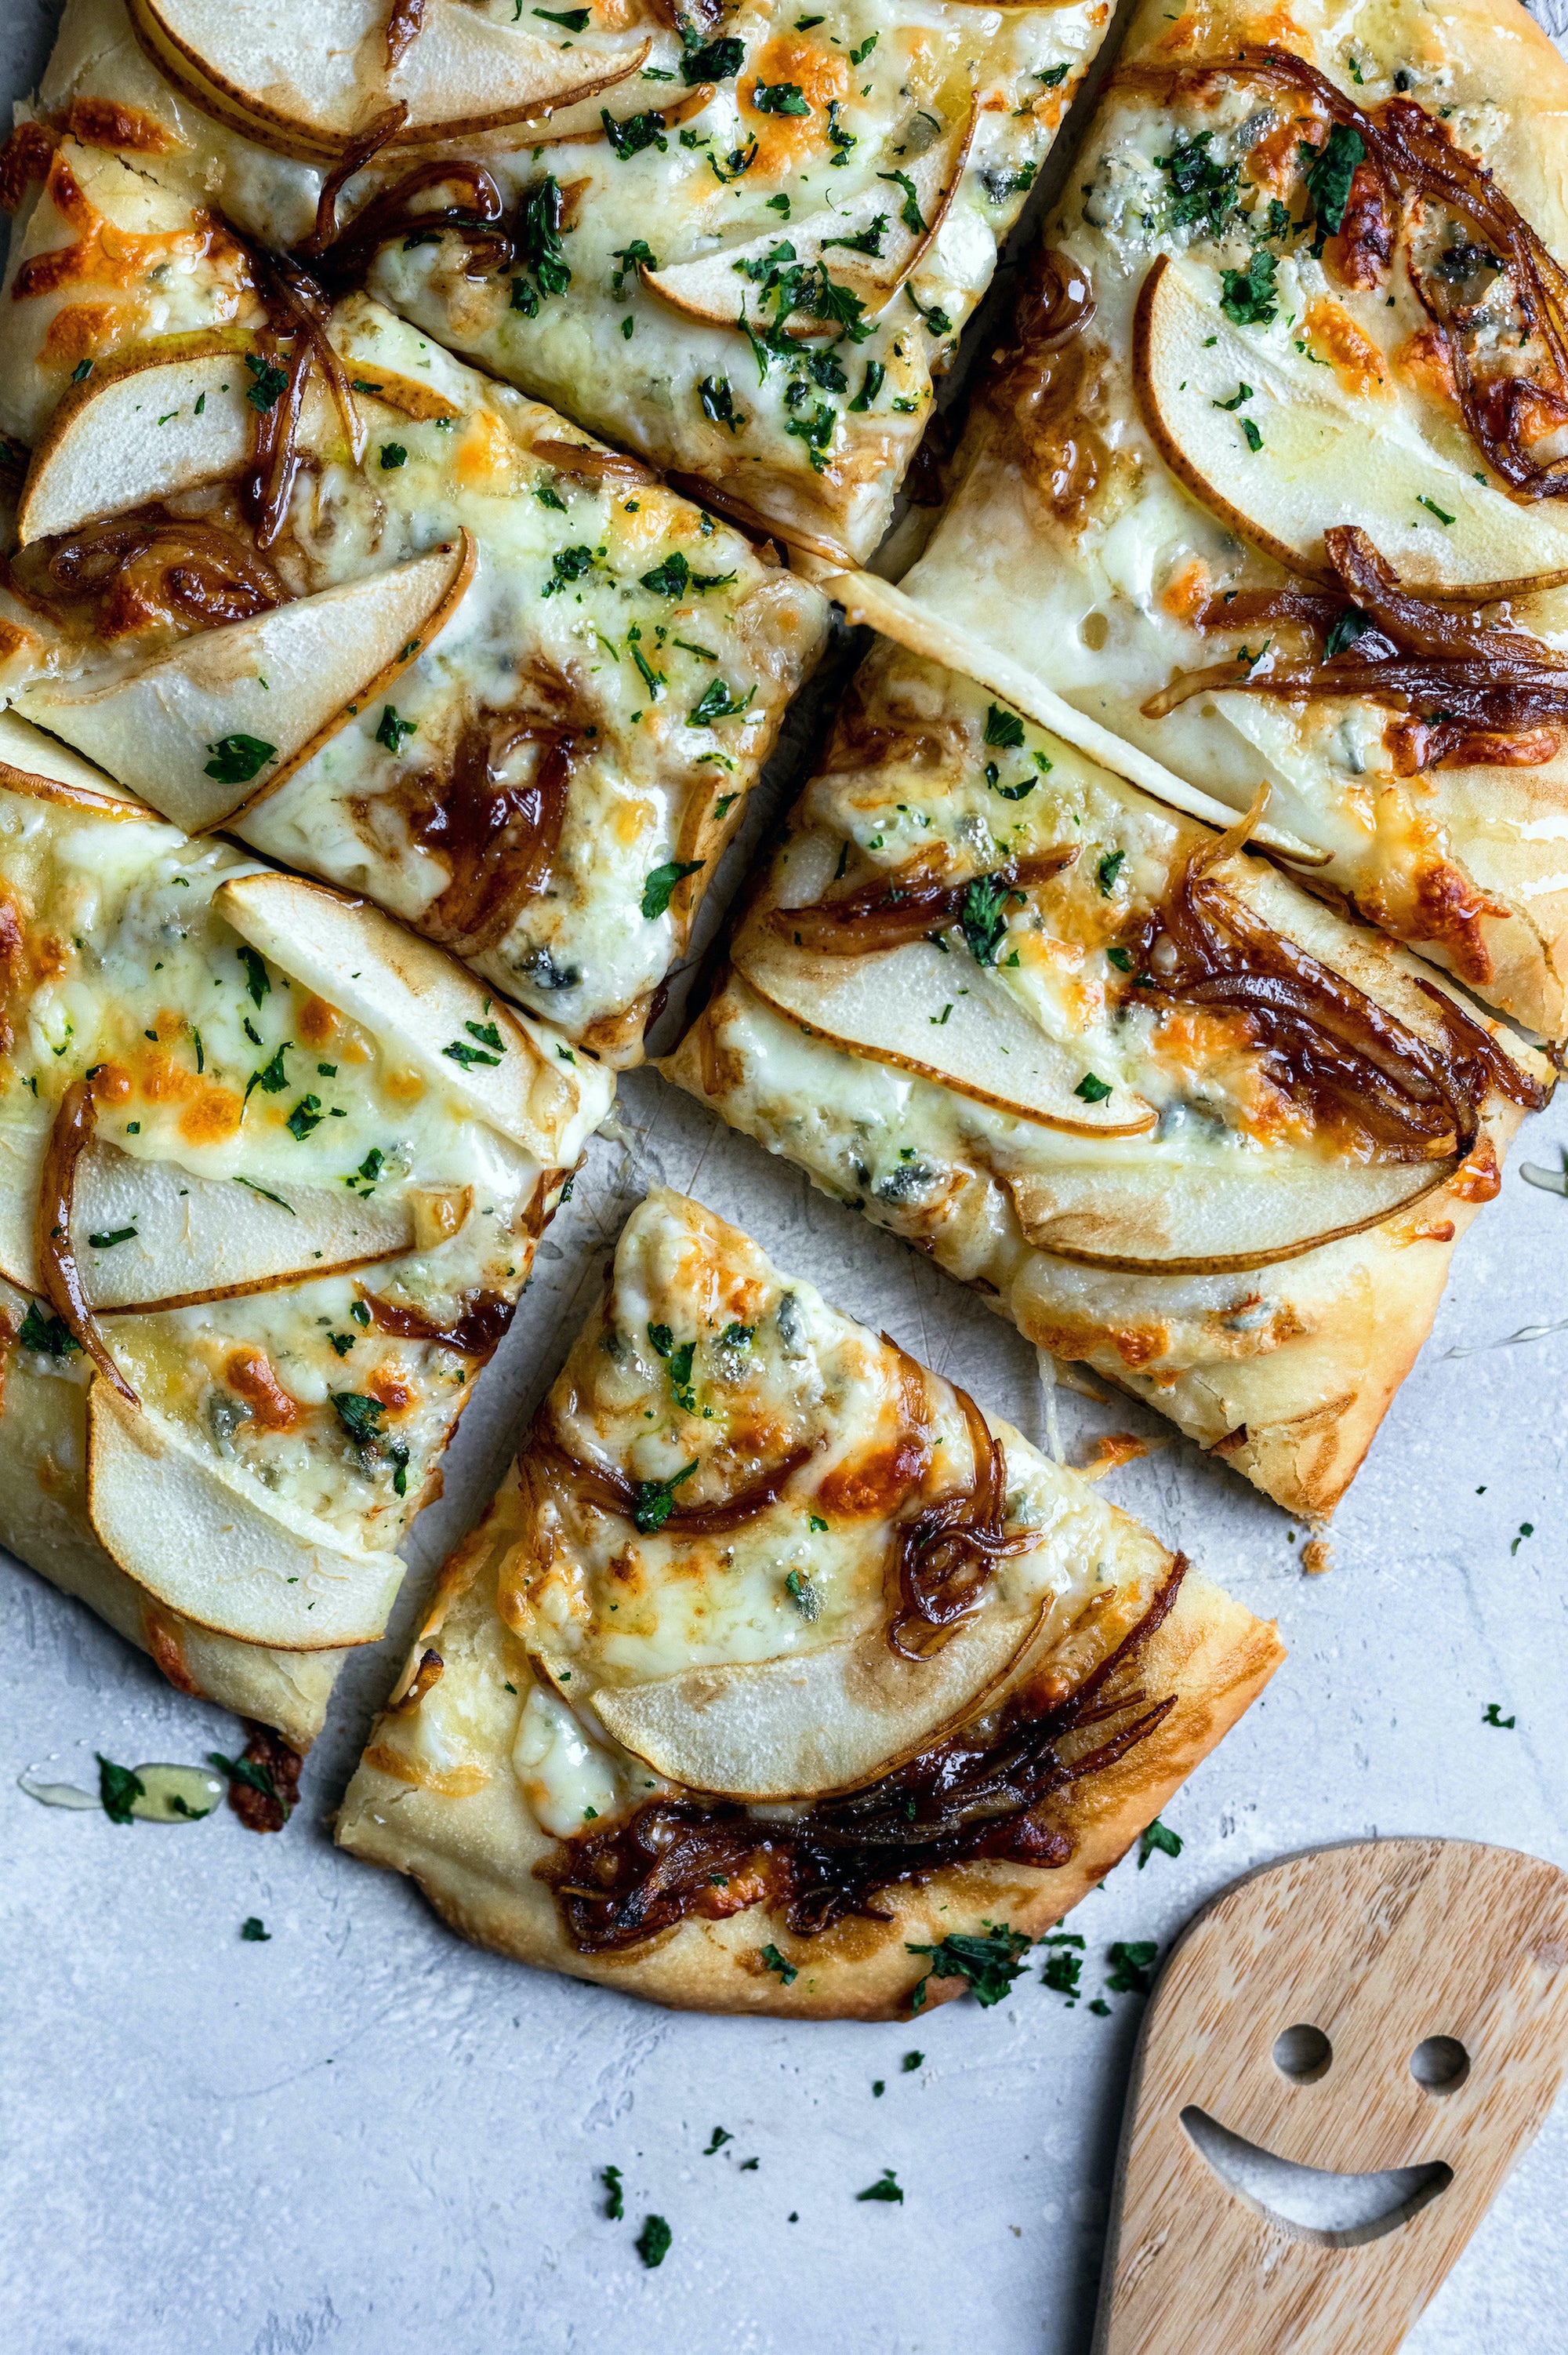 Pear & Caramelized Onion Pizza